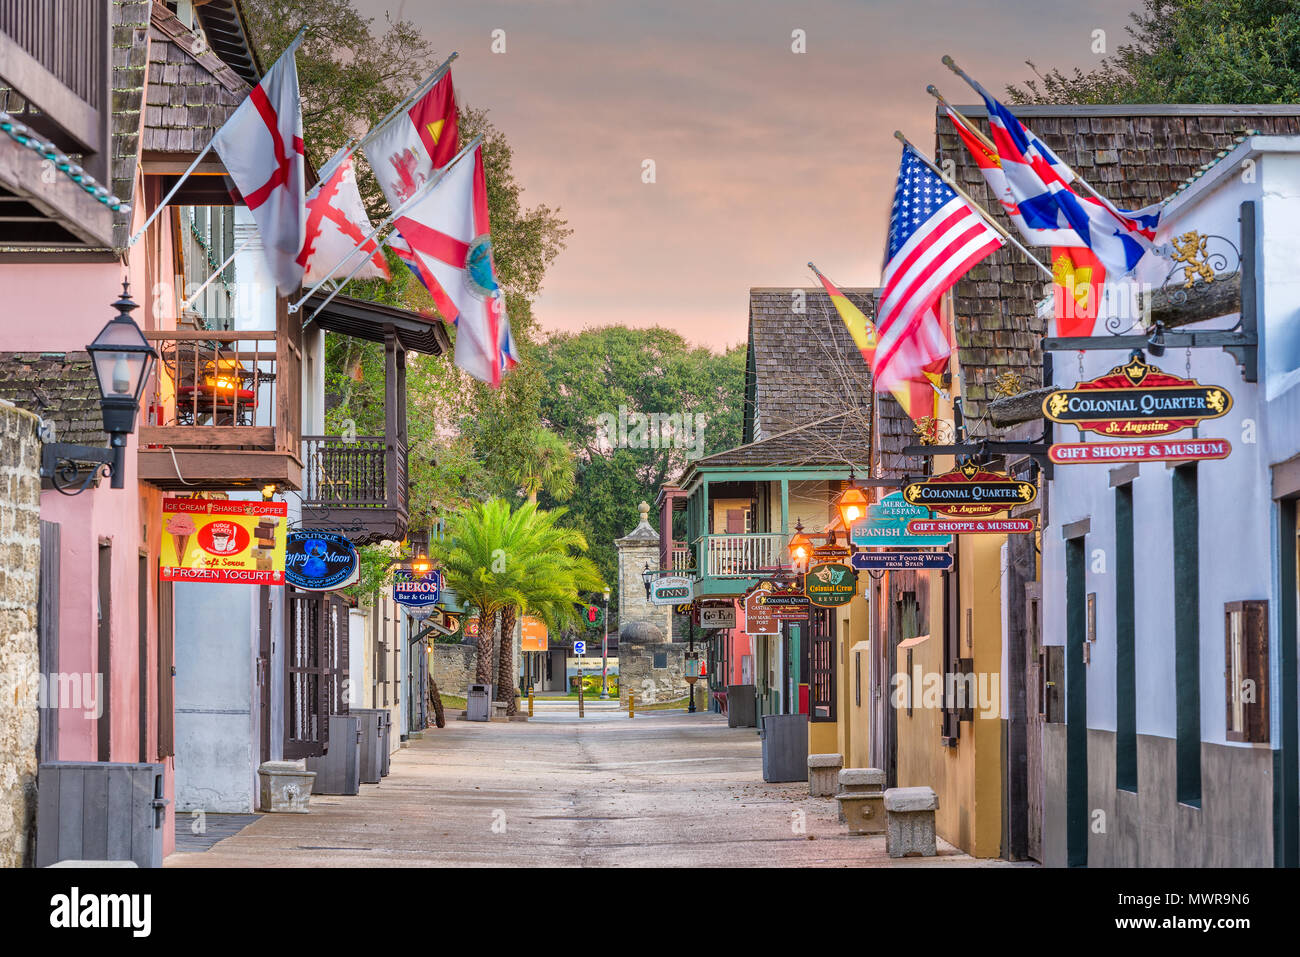 ST. AUGUSTINE, FLORIDA - JANUARY 5, 2015: Shops and inns line St. George. Once the main street, it is still considered the heart of the city. Stock Photo